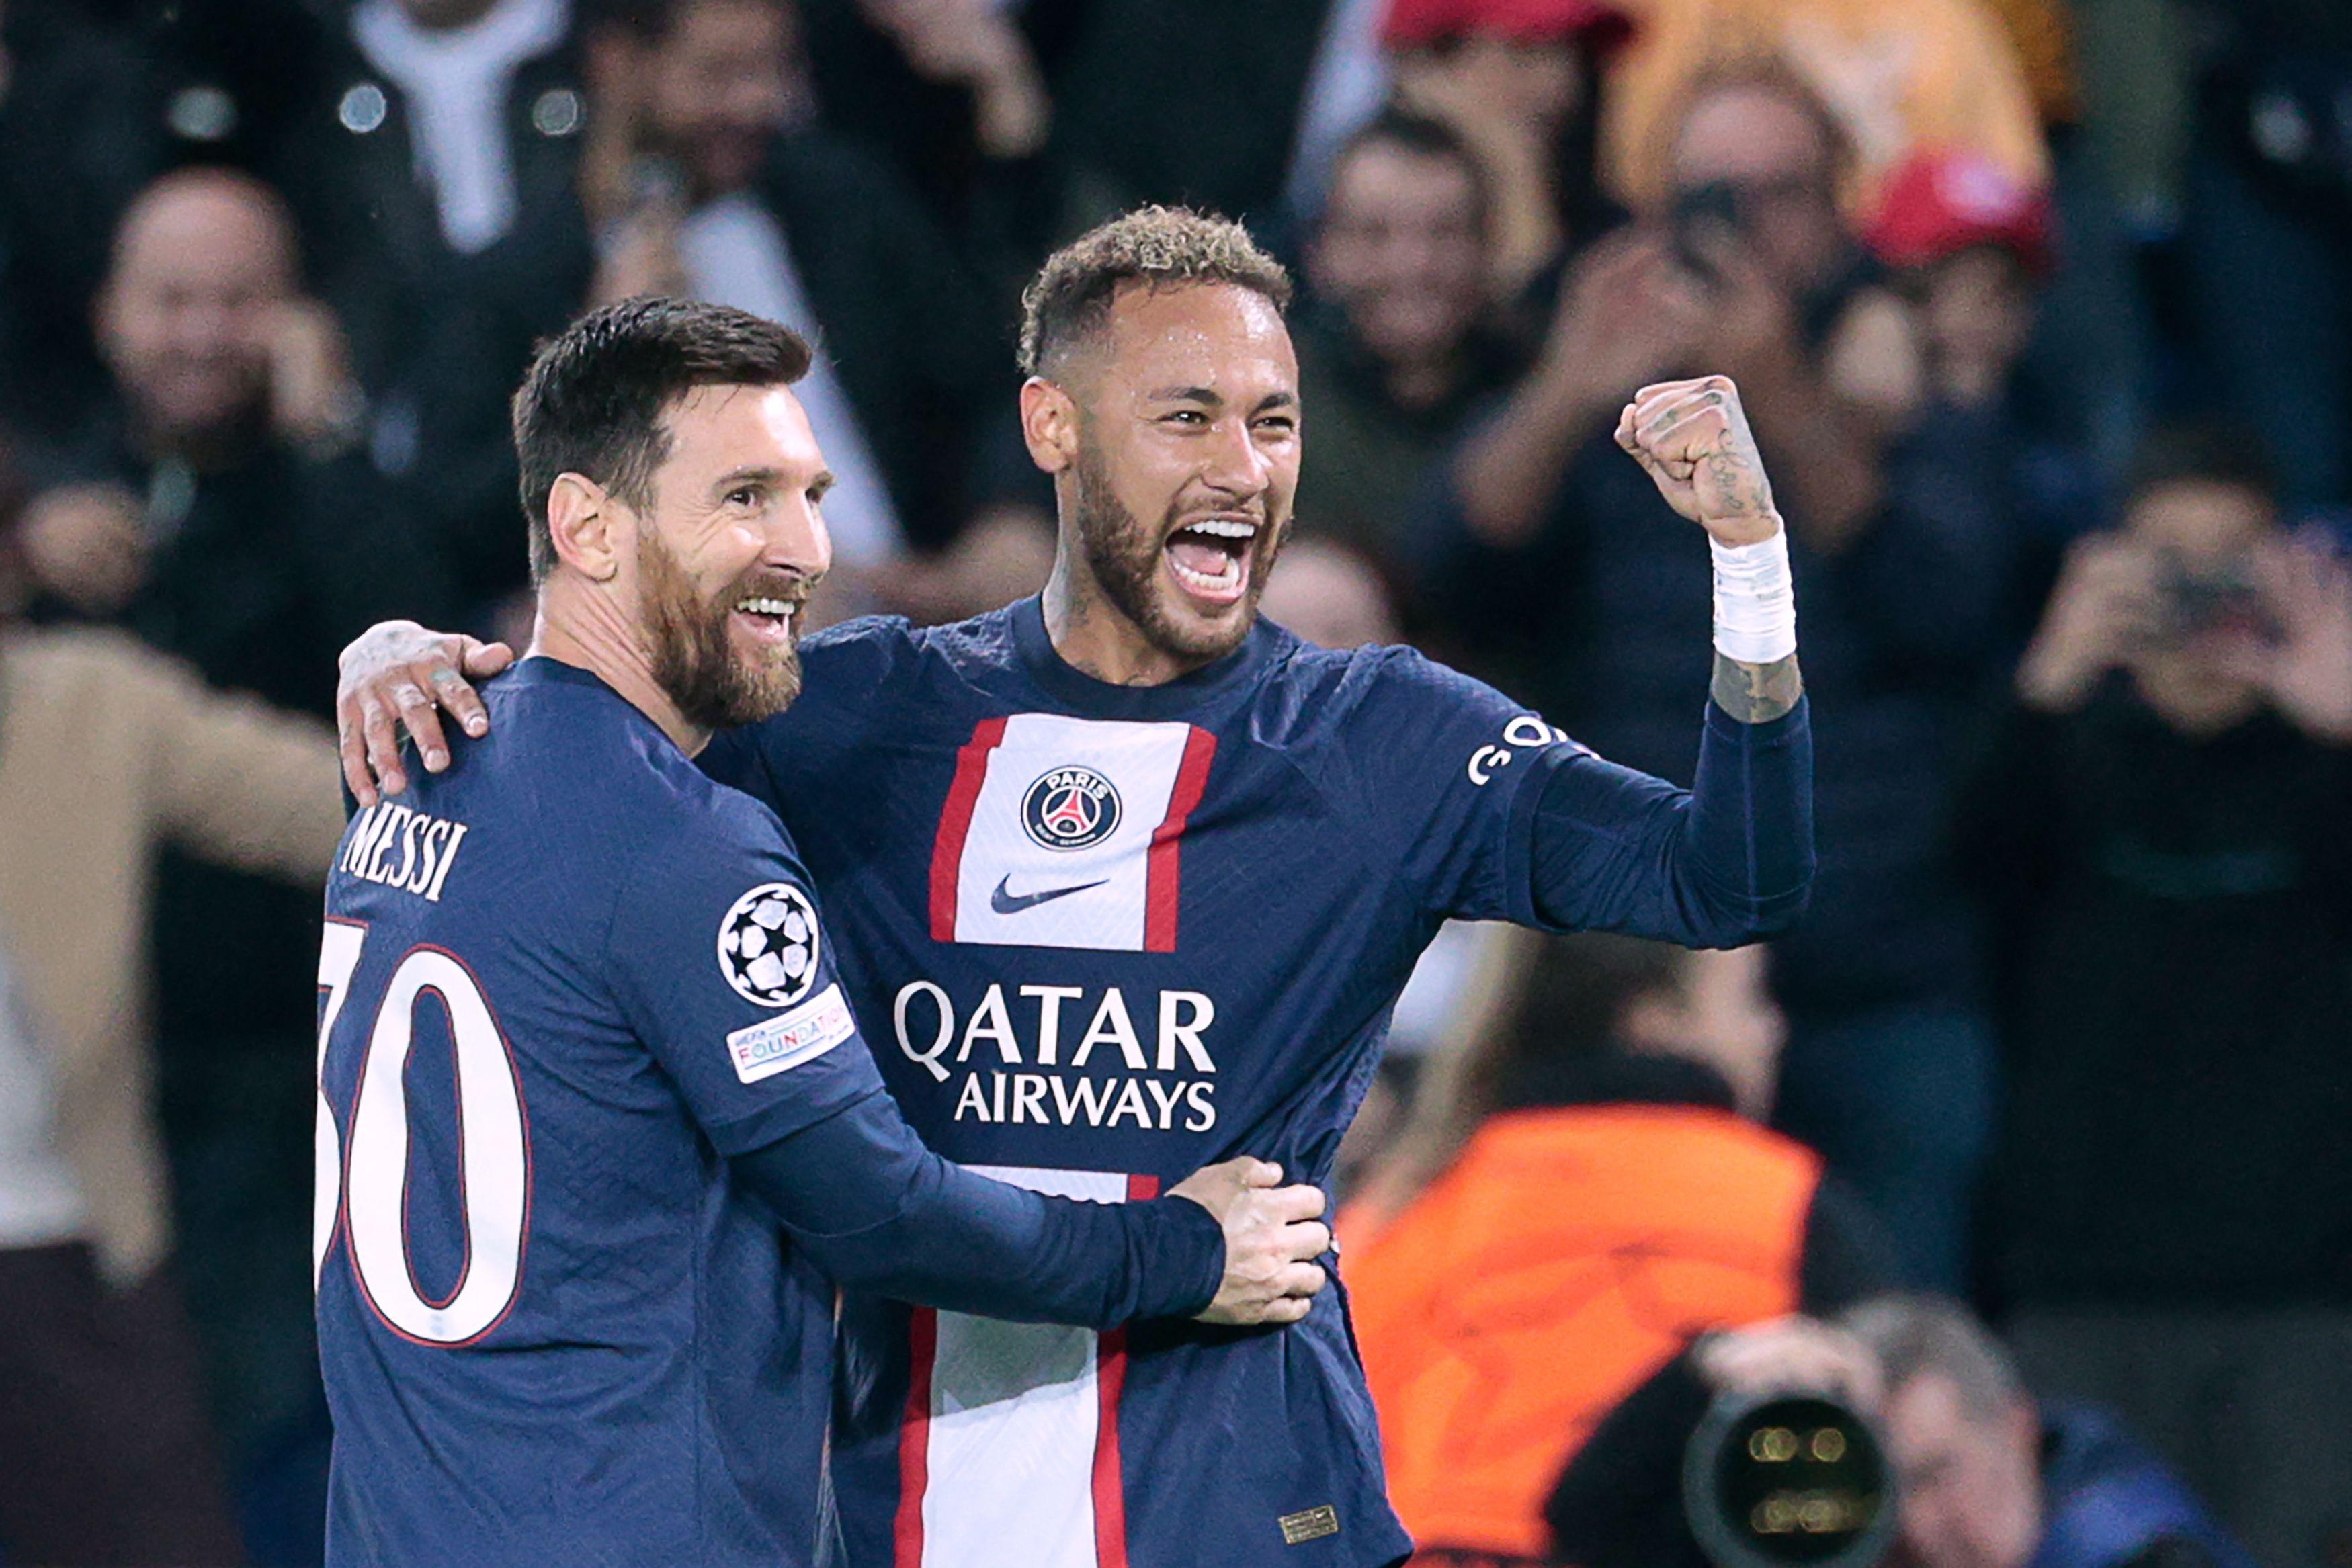 Champions League Lionel Messi and Kylian Mbapp score twice as